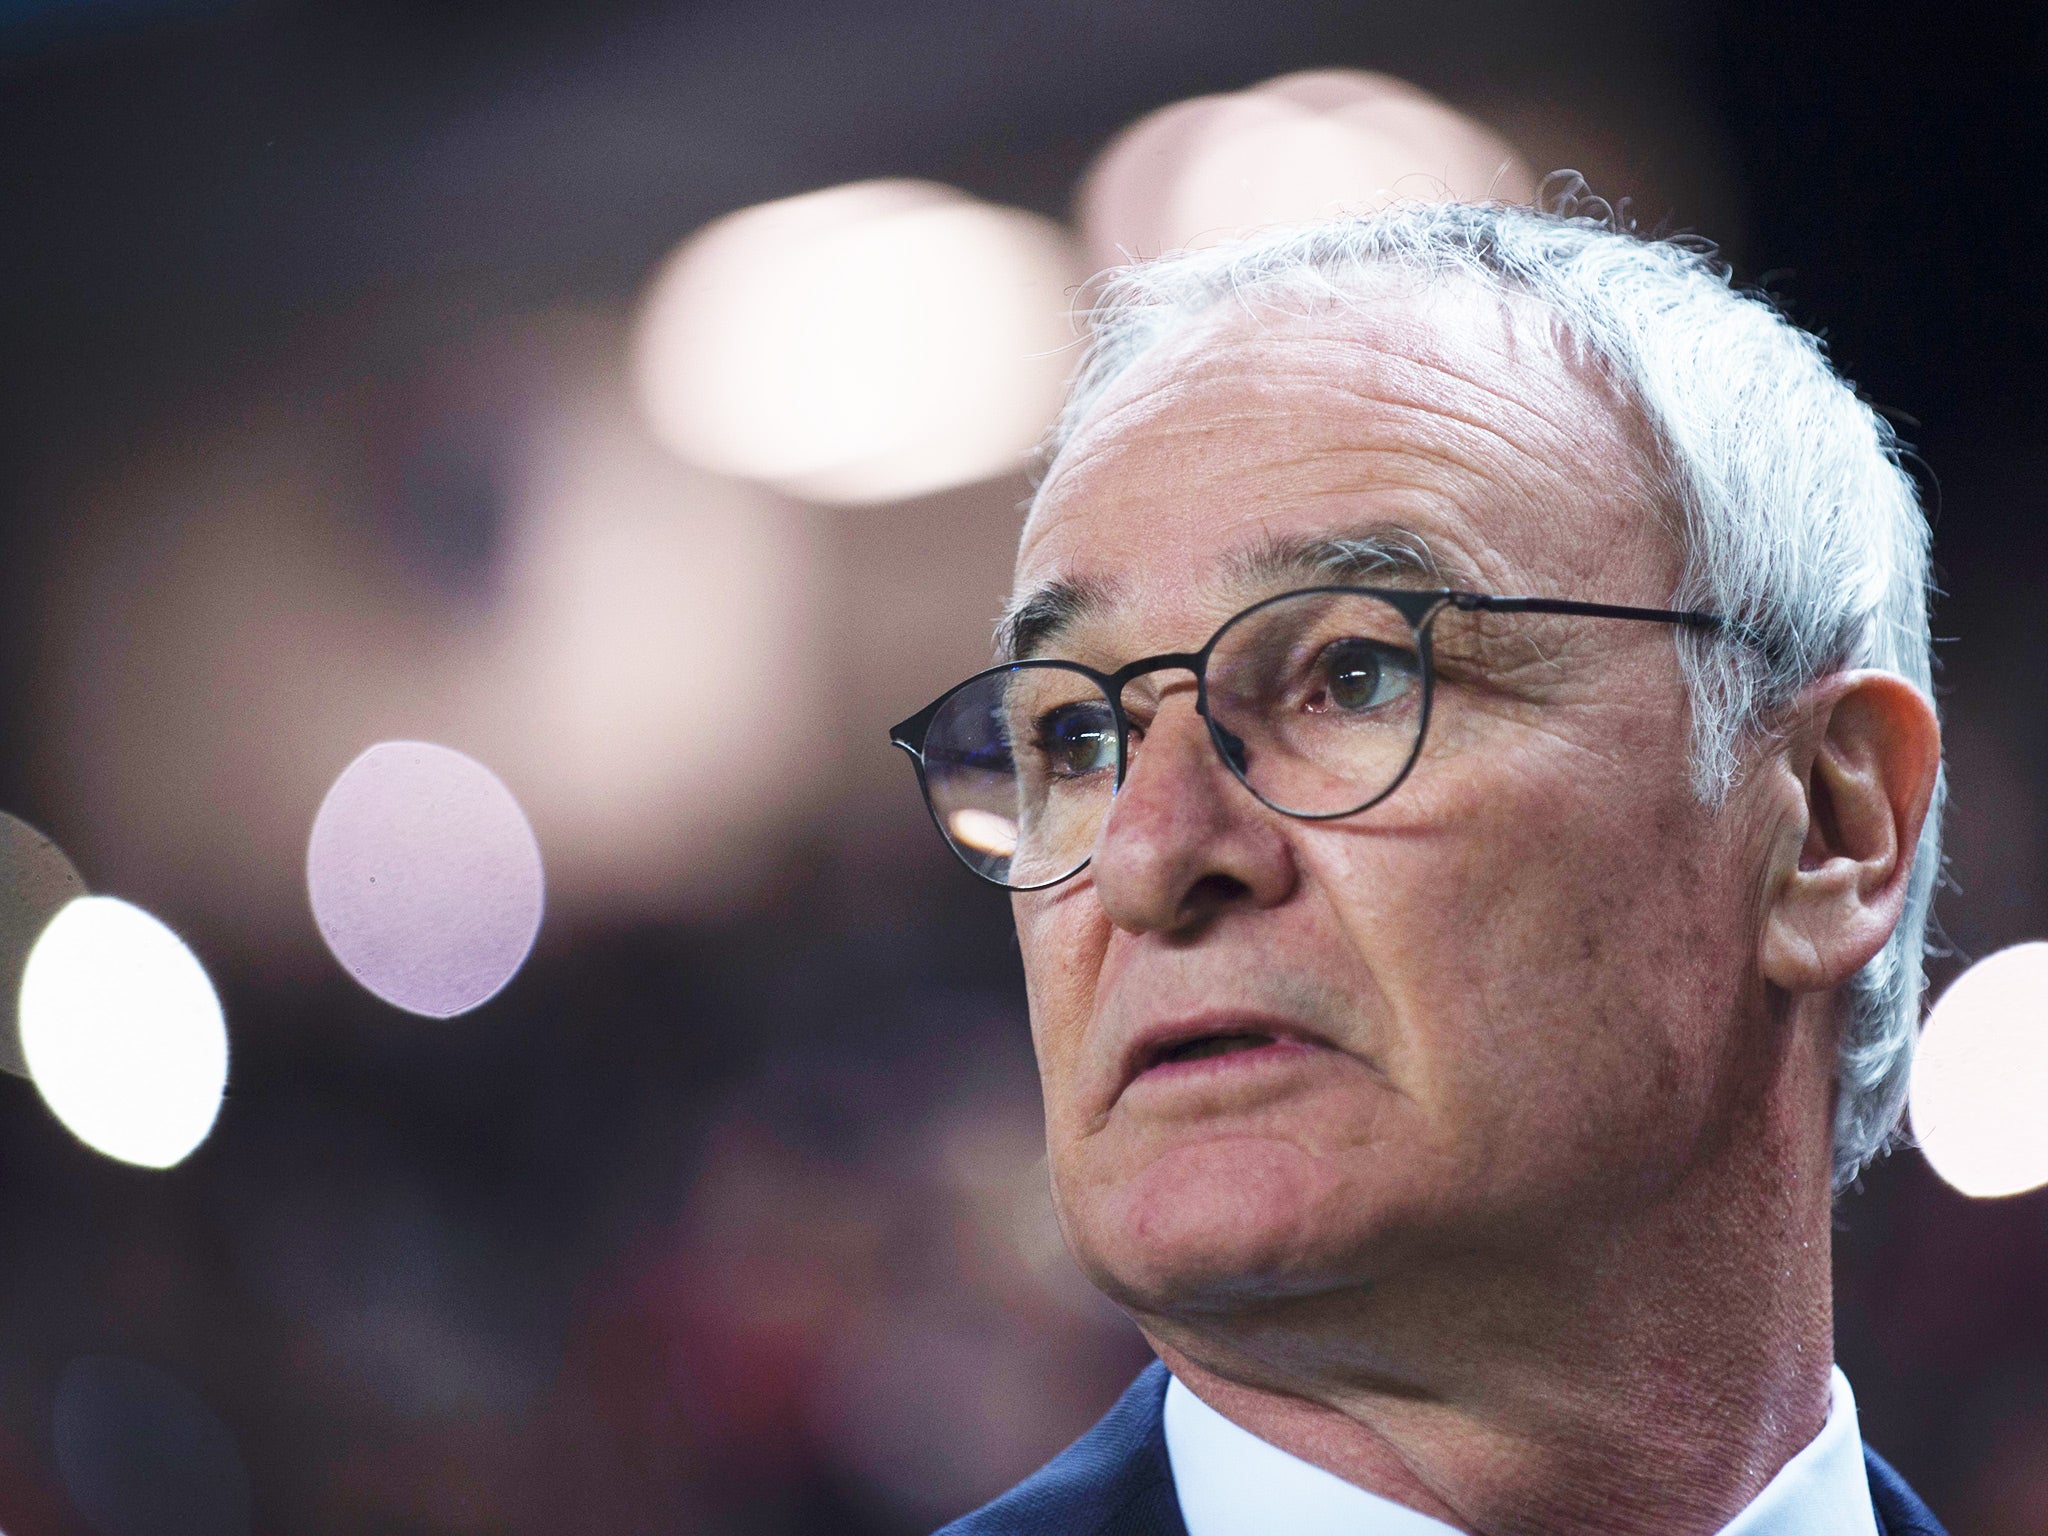 Reports had surfaced that players wanted Claudio Ranieri out